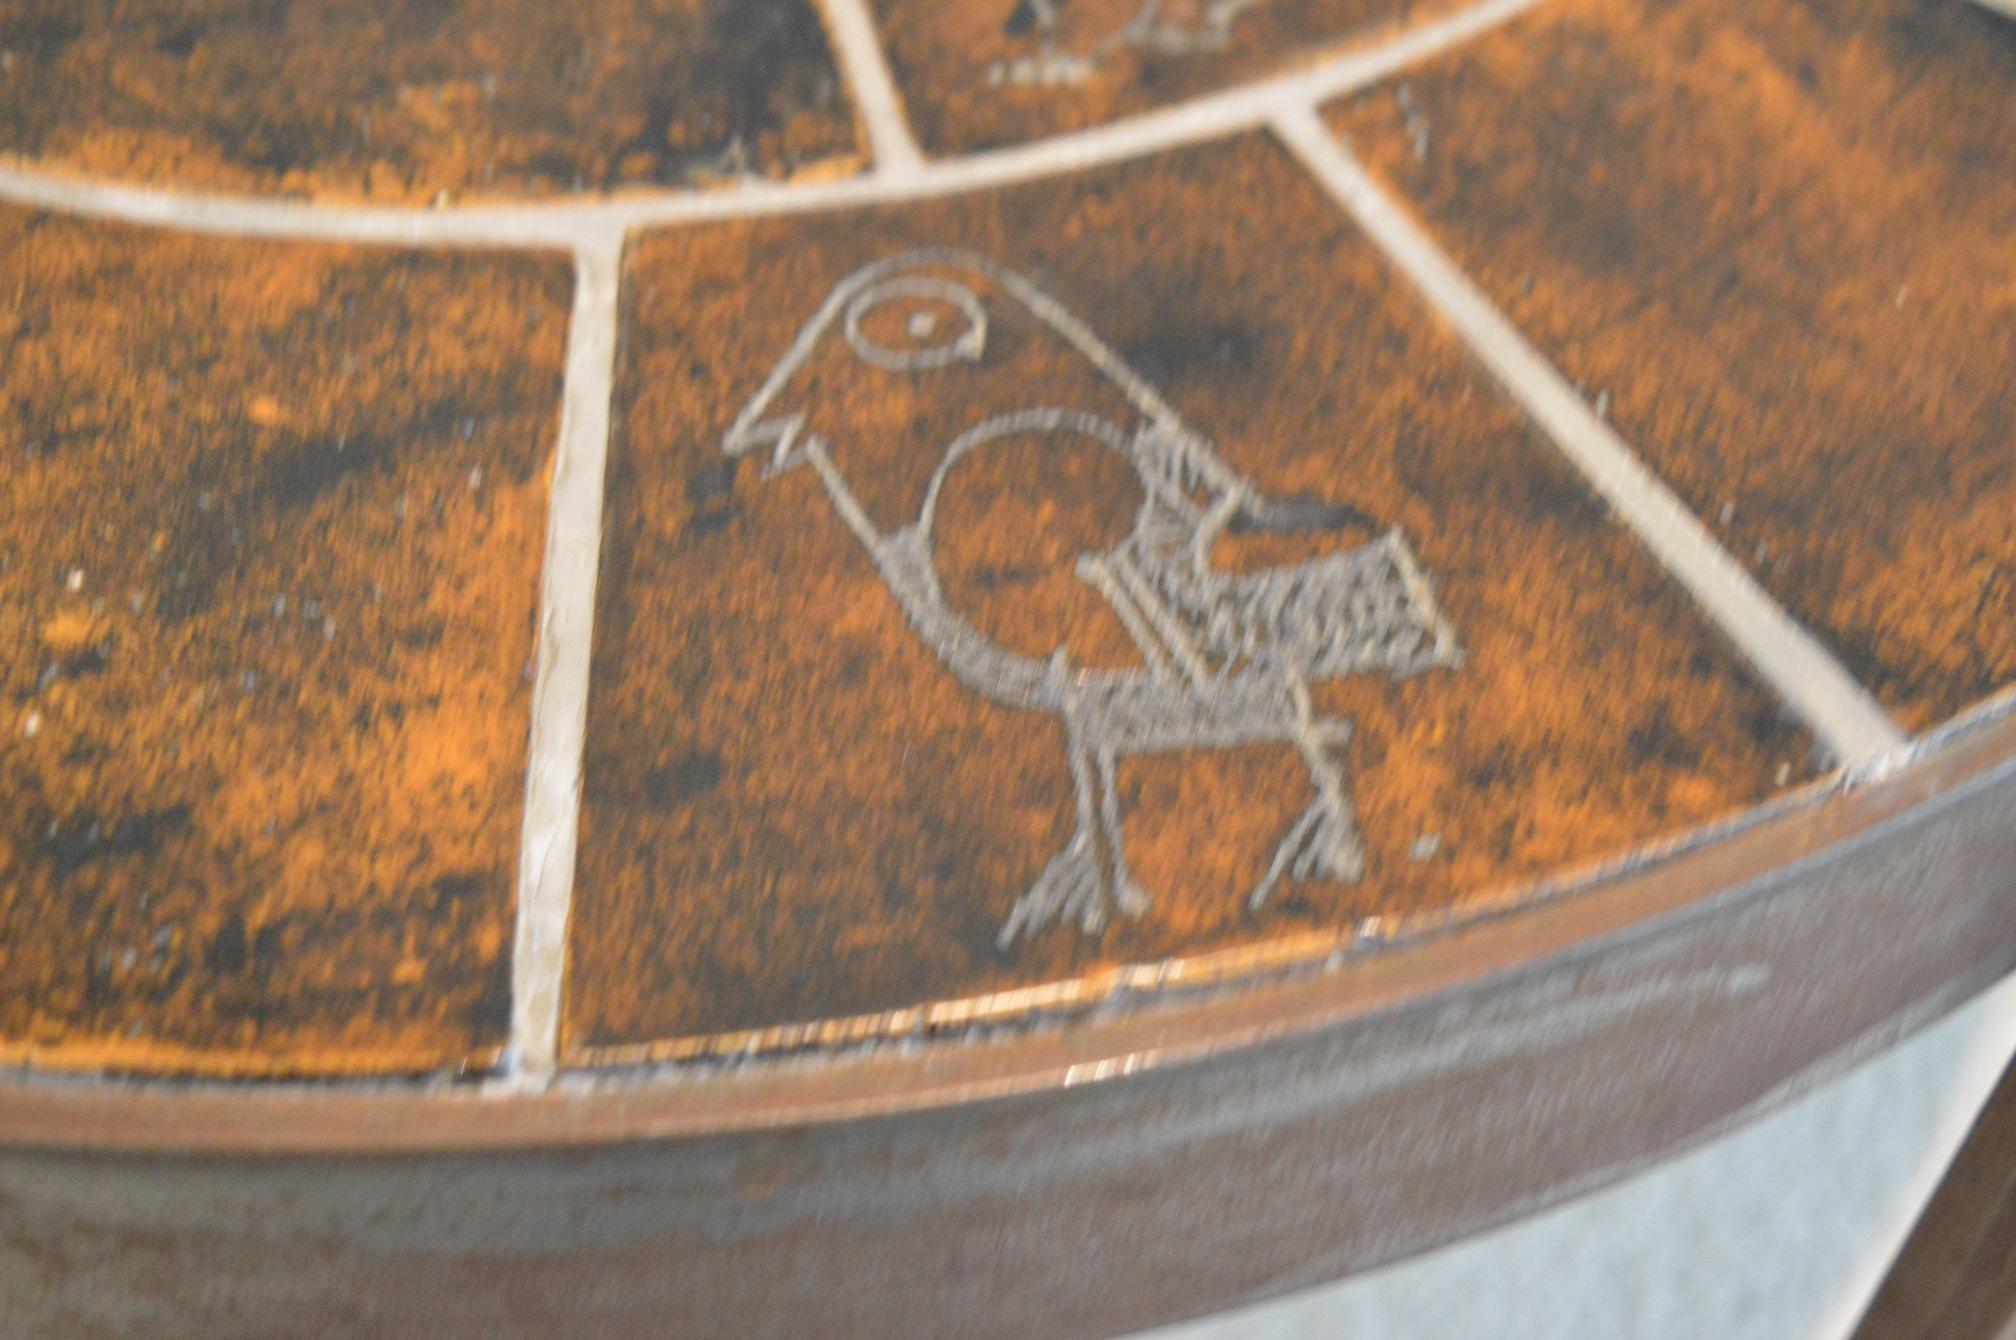 Low table signed by Jacques Blin in steel and ceramic.
French work, circa 1950.